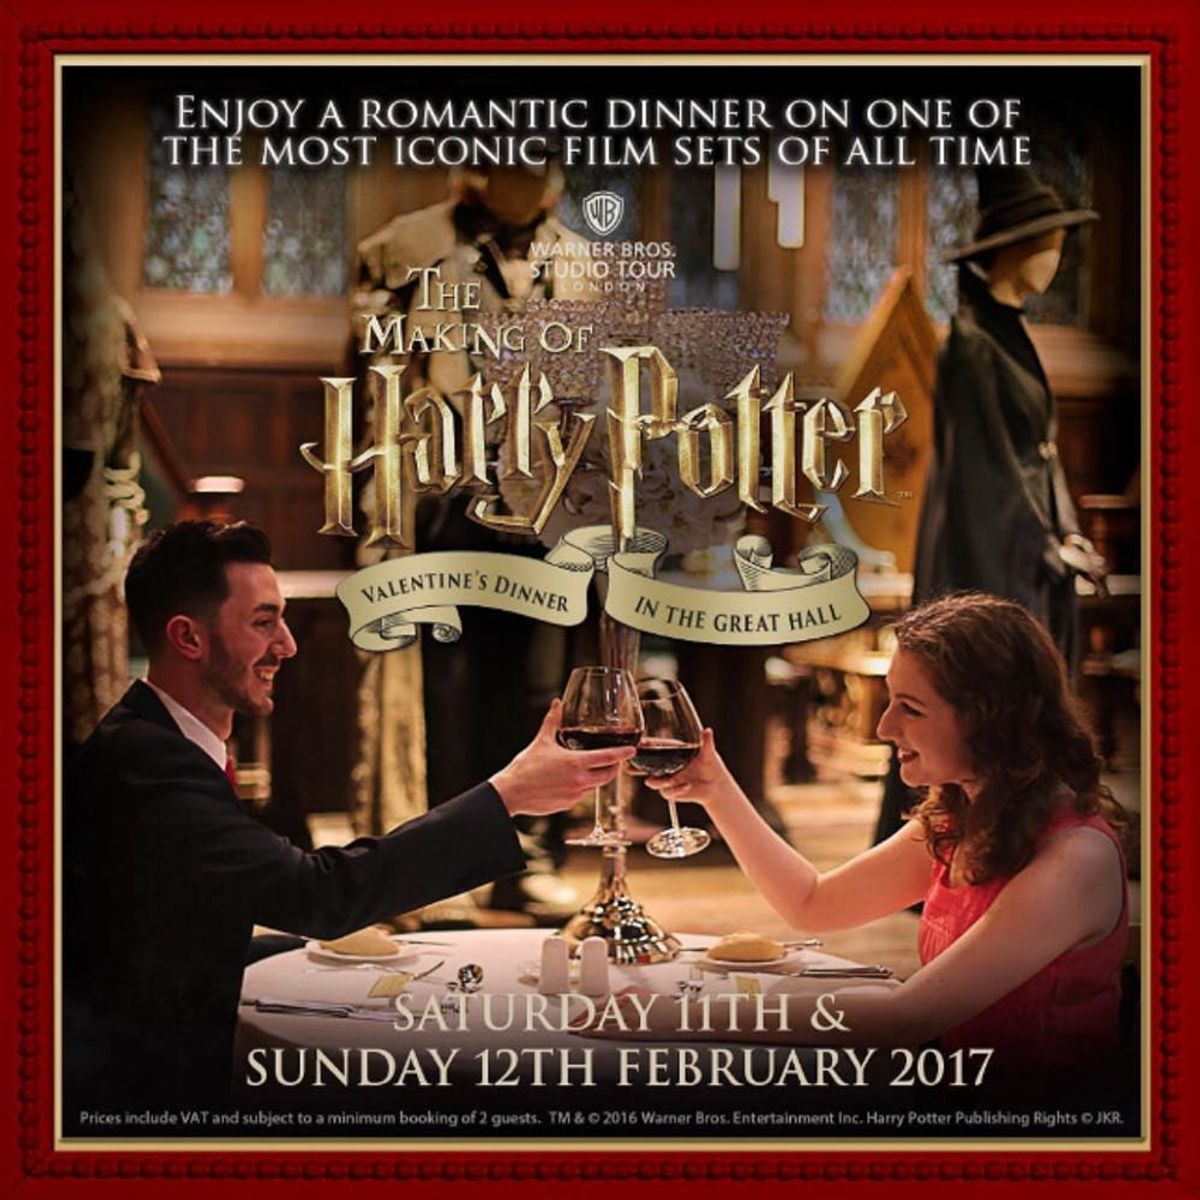 Need Valentine’s Plans? Dinner at Hogwarts Great Hall Is Happening Again This Year